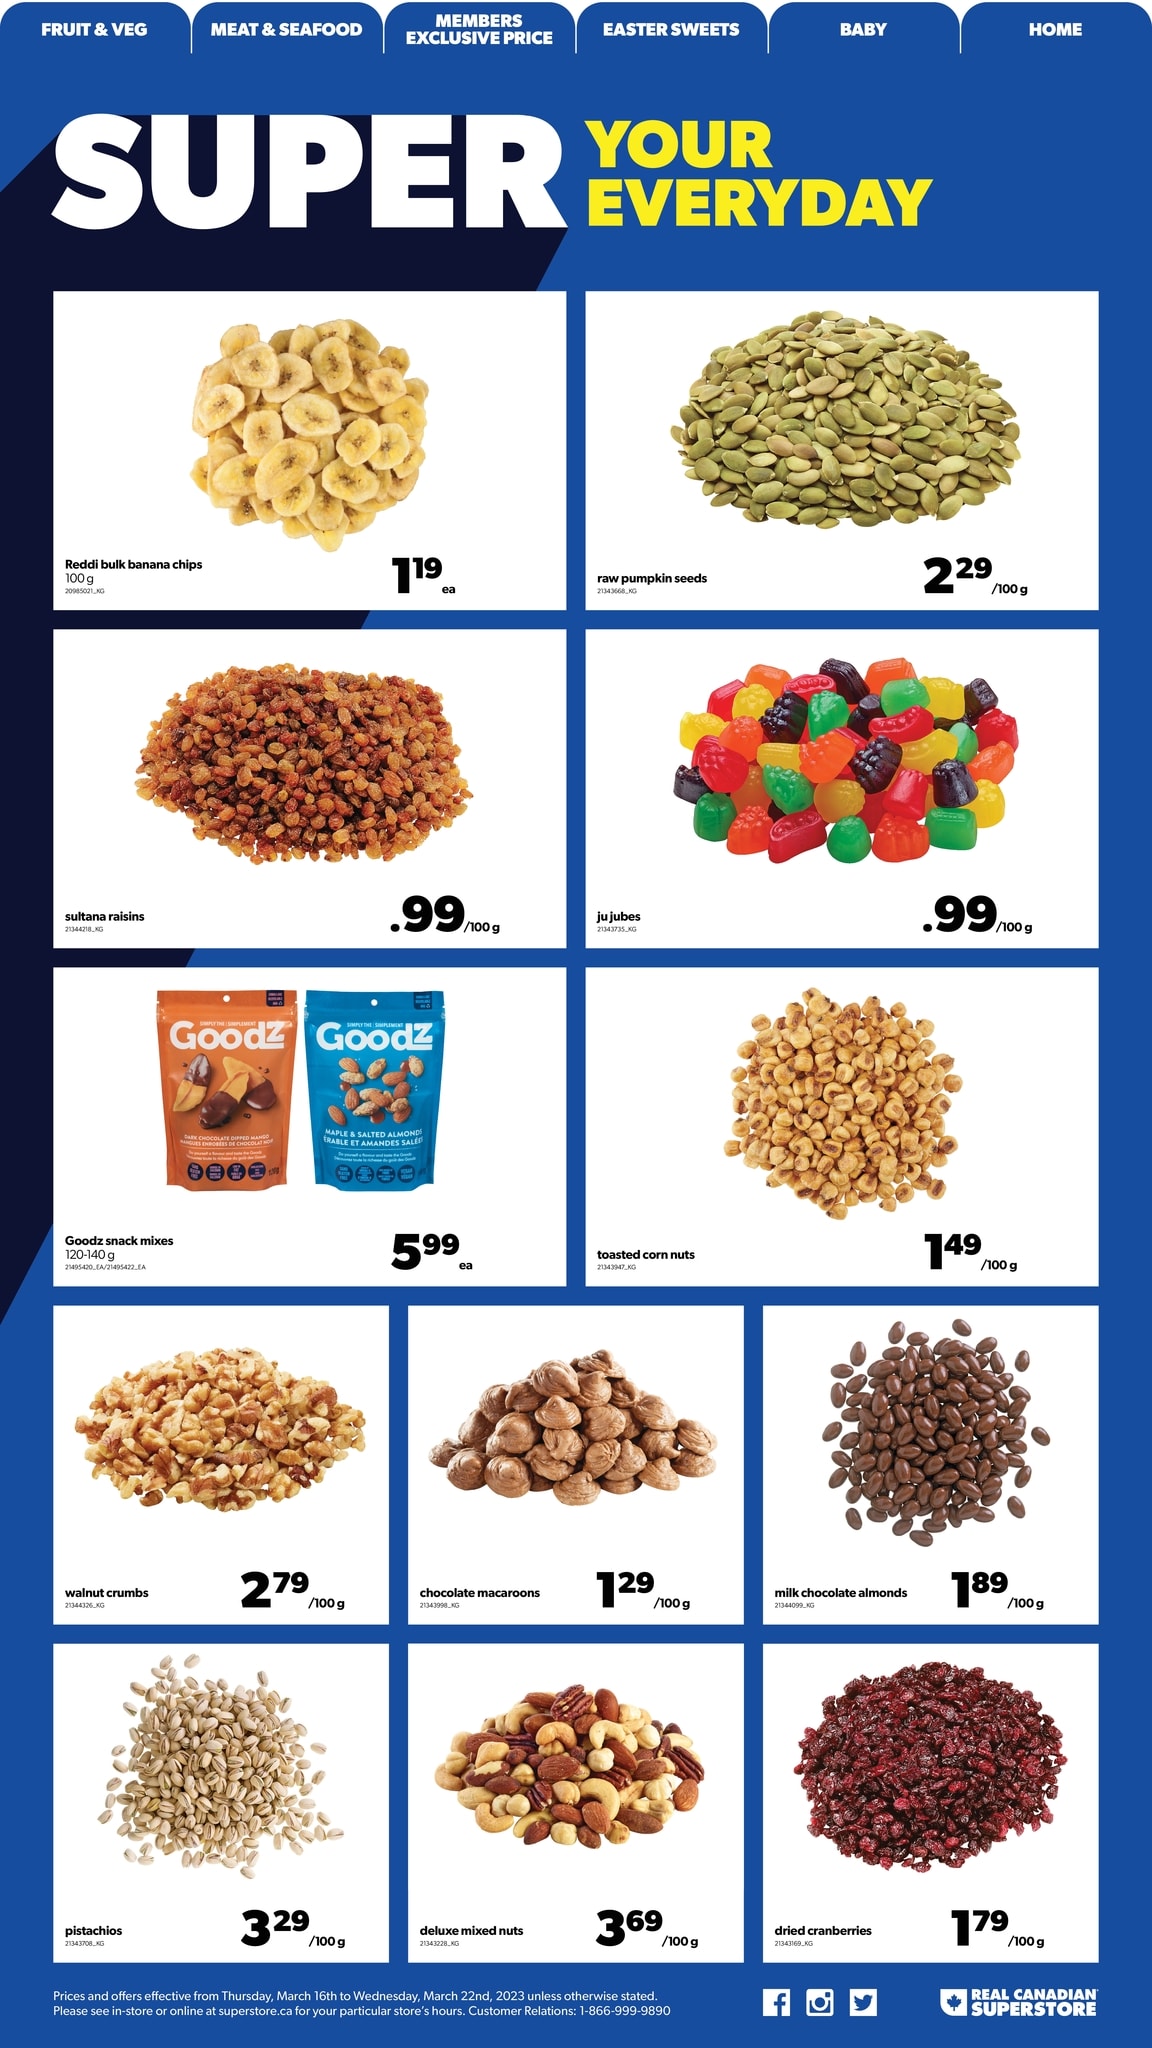 Real Canadian Superstore - Western Canada - Weekly Flyer Specials - Page 8